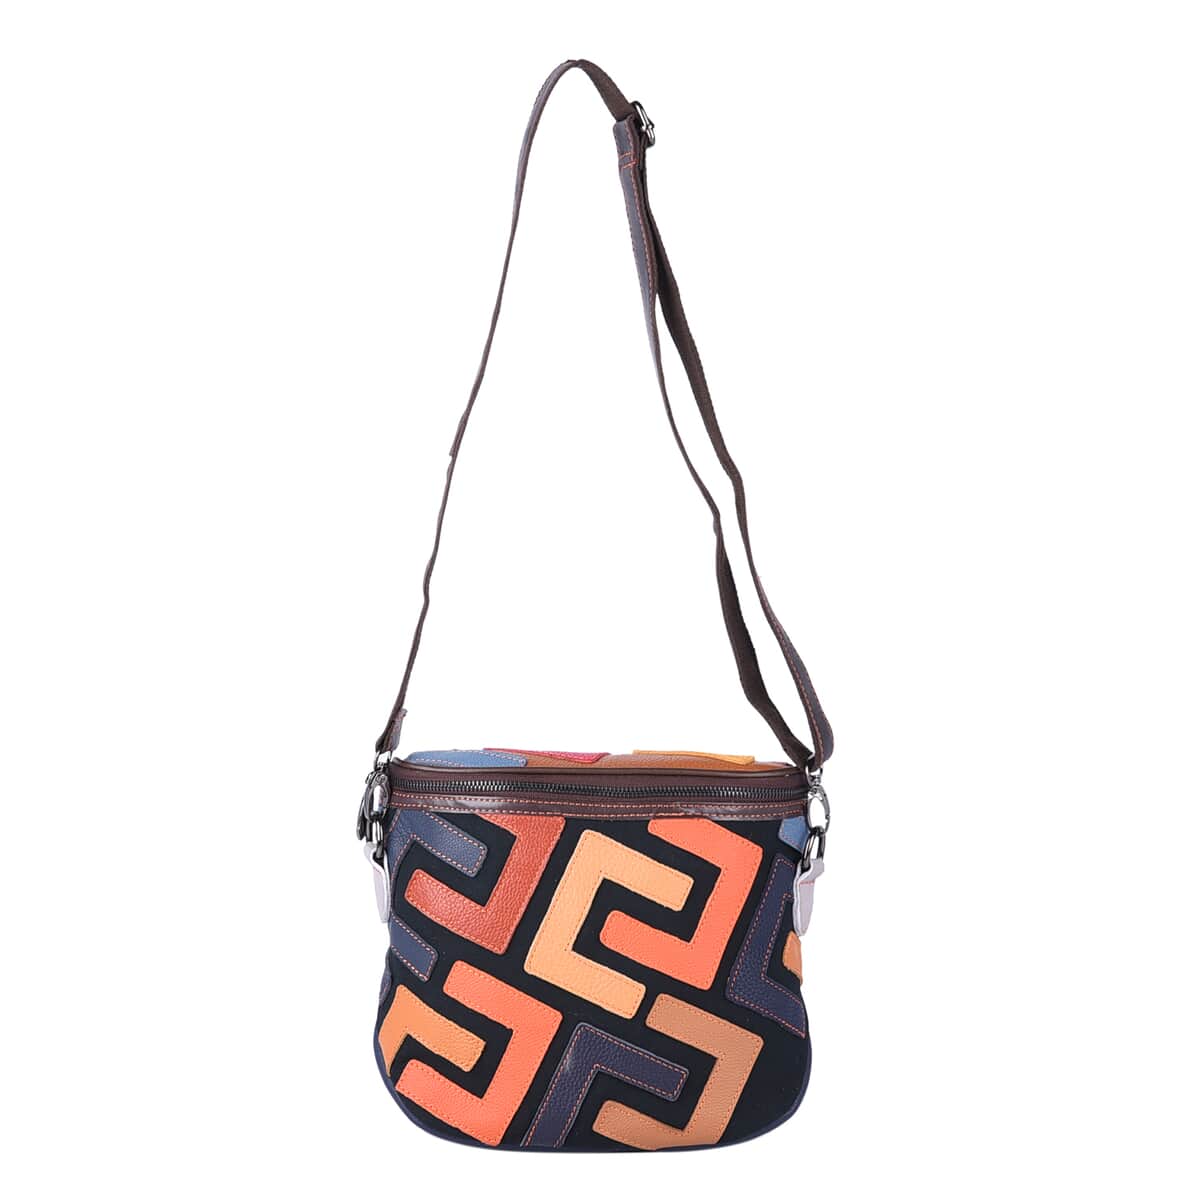 CHAOS BY ELSIE Multi Color Fret Pattern Genuine Leather Crossbody Bag with Shoulder Strap (9.84"x3.15"x8.27") image number 0